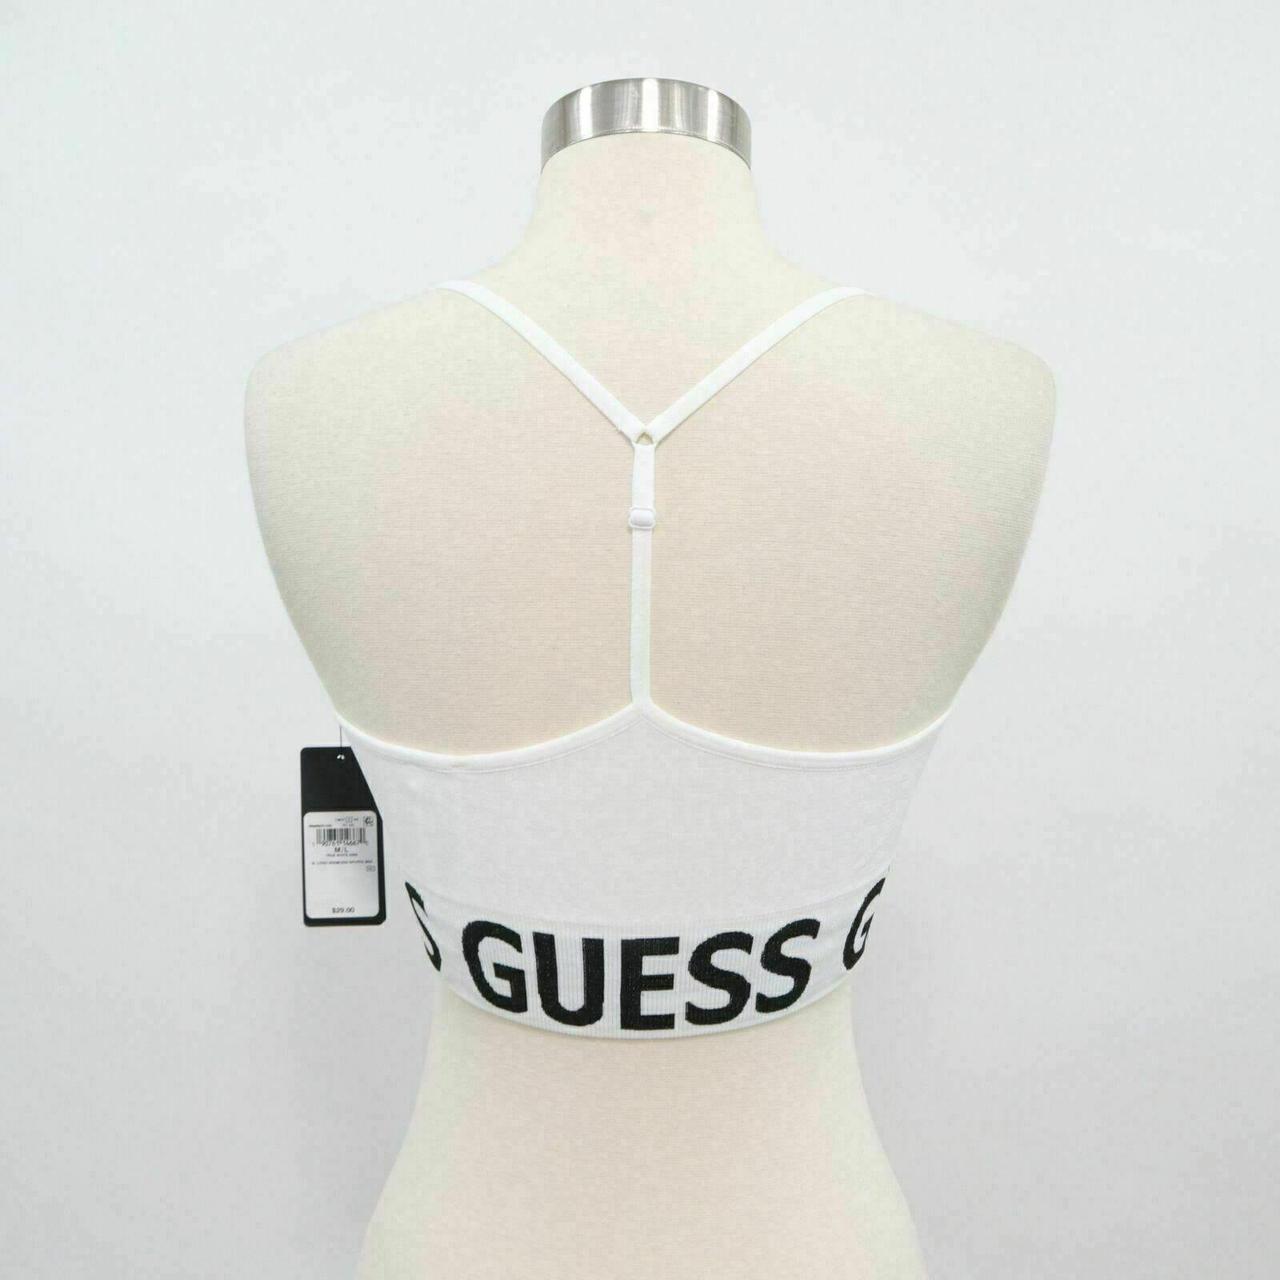 Guess Women's White Vests-tanks-camis (2)